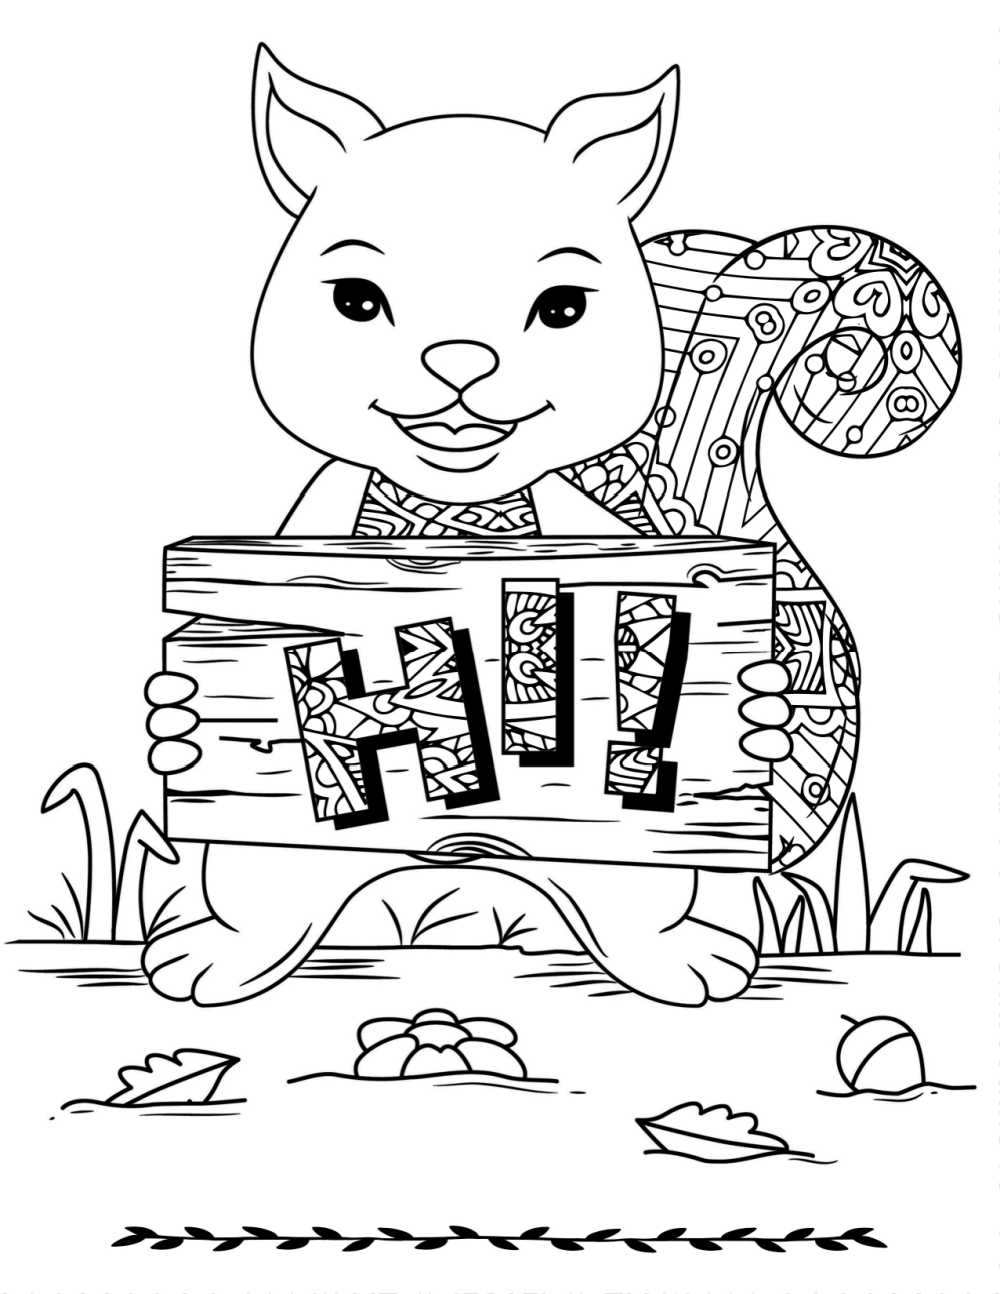 coloring page with a squirrel saying hi. 